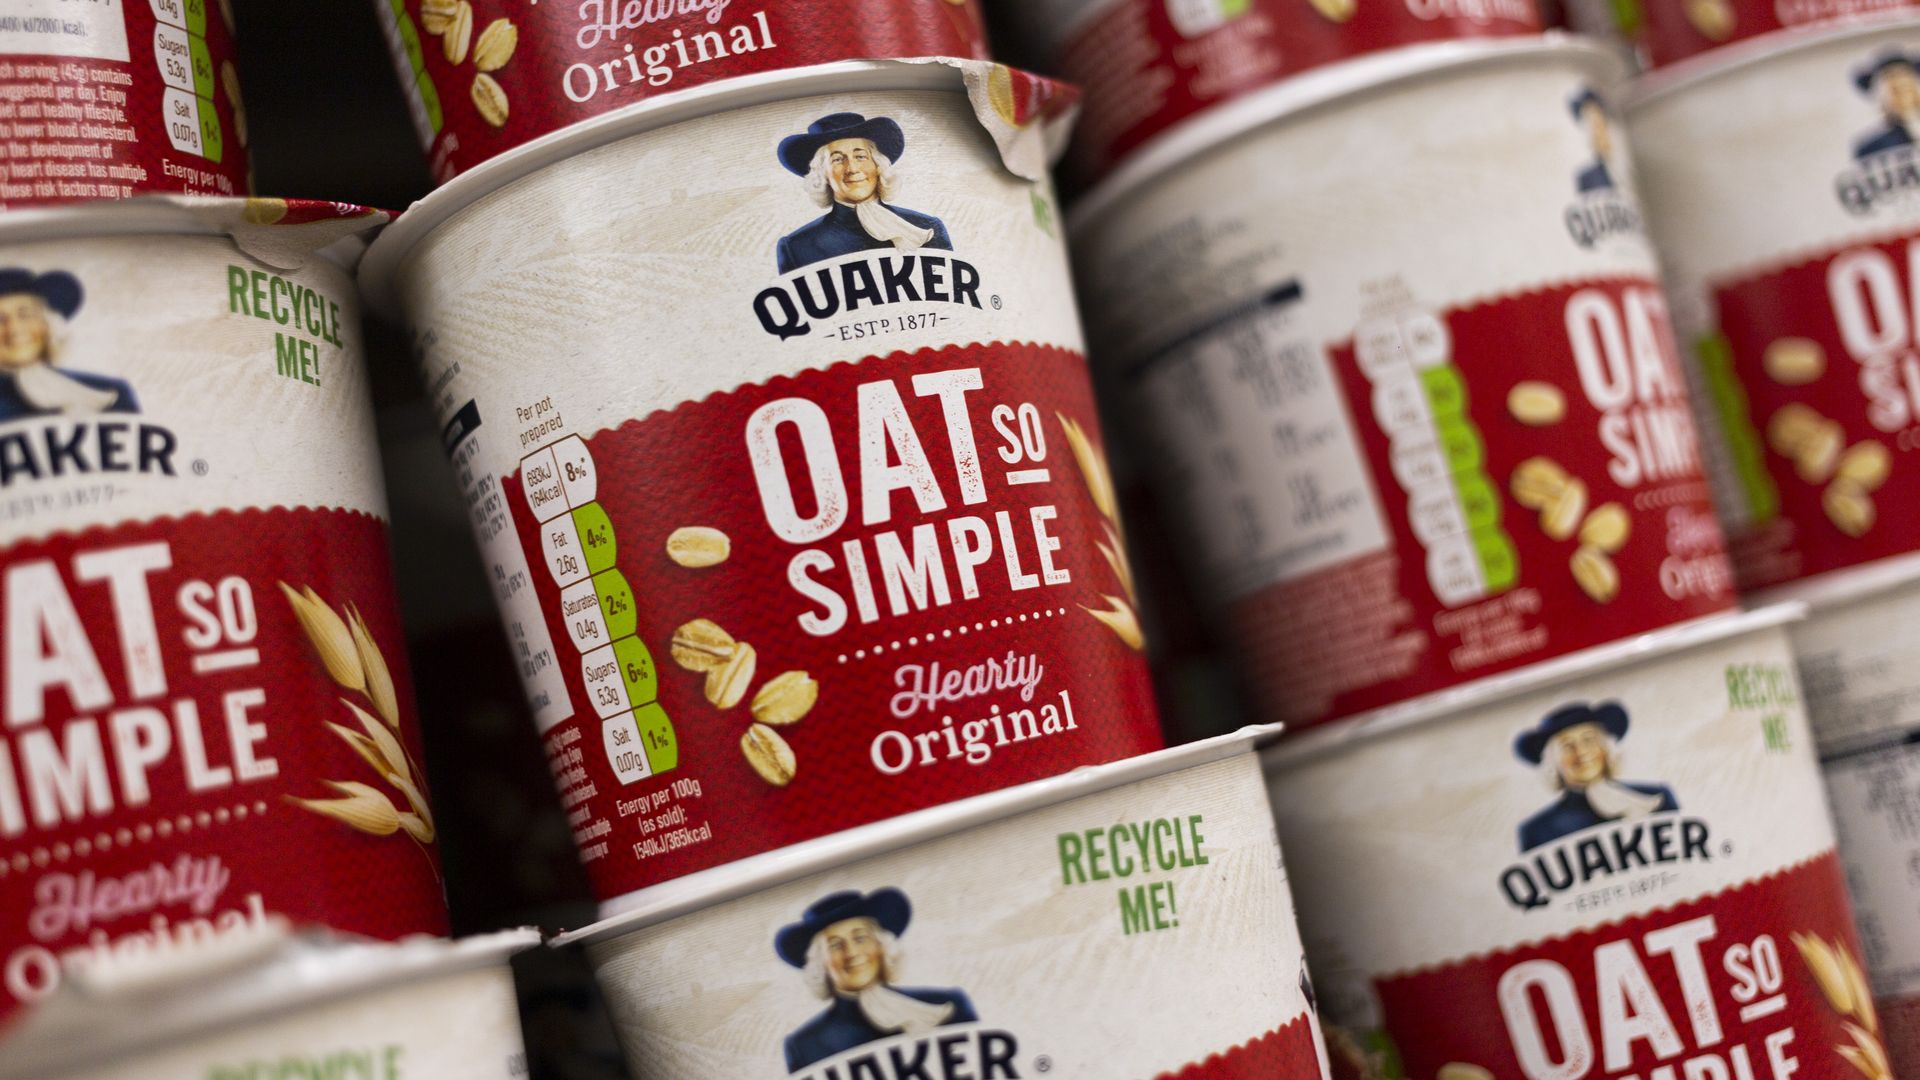 Quaker Oats products in round, red and white containers sit on a shelf.